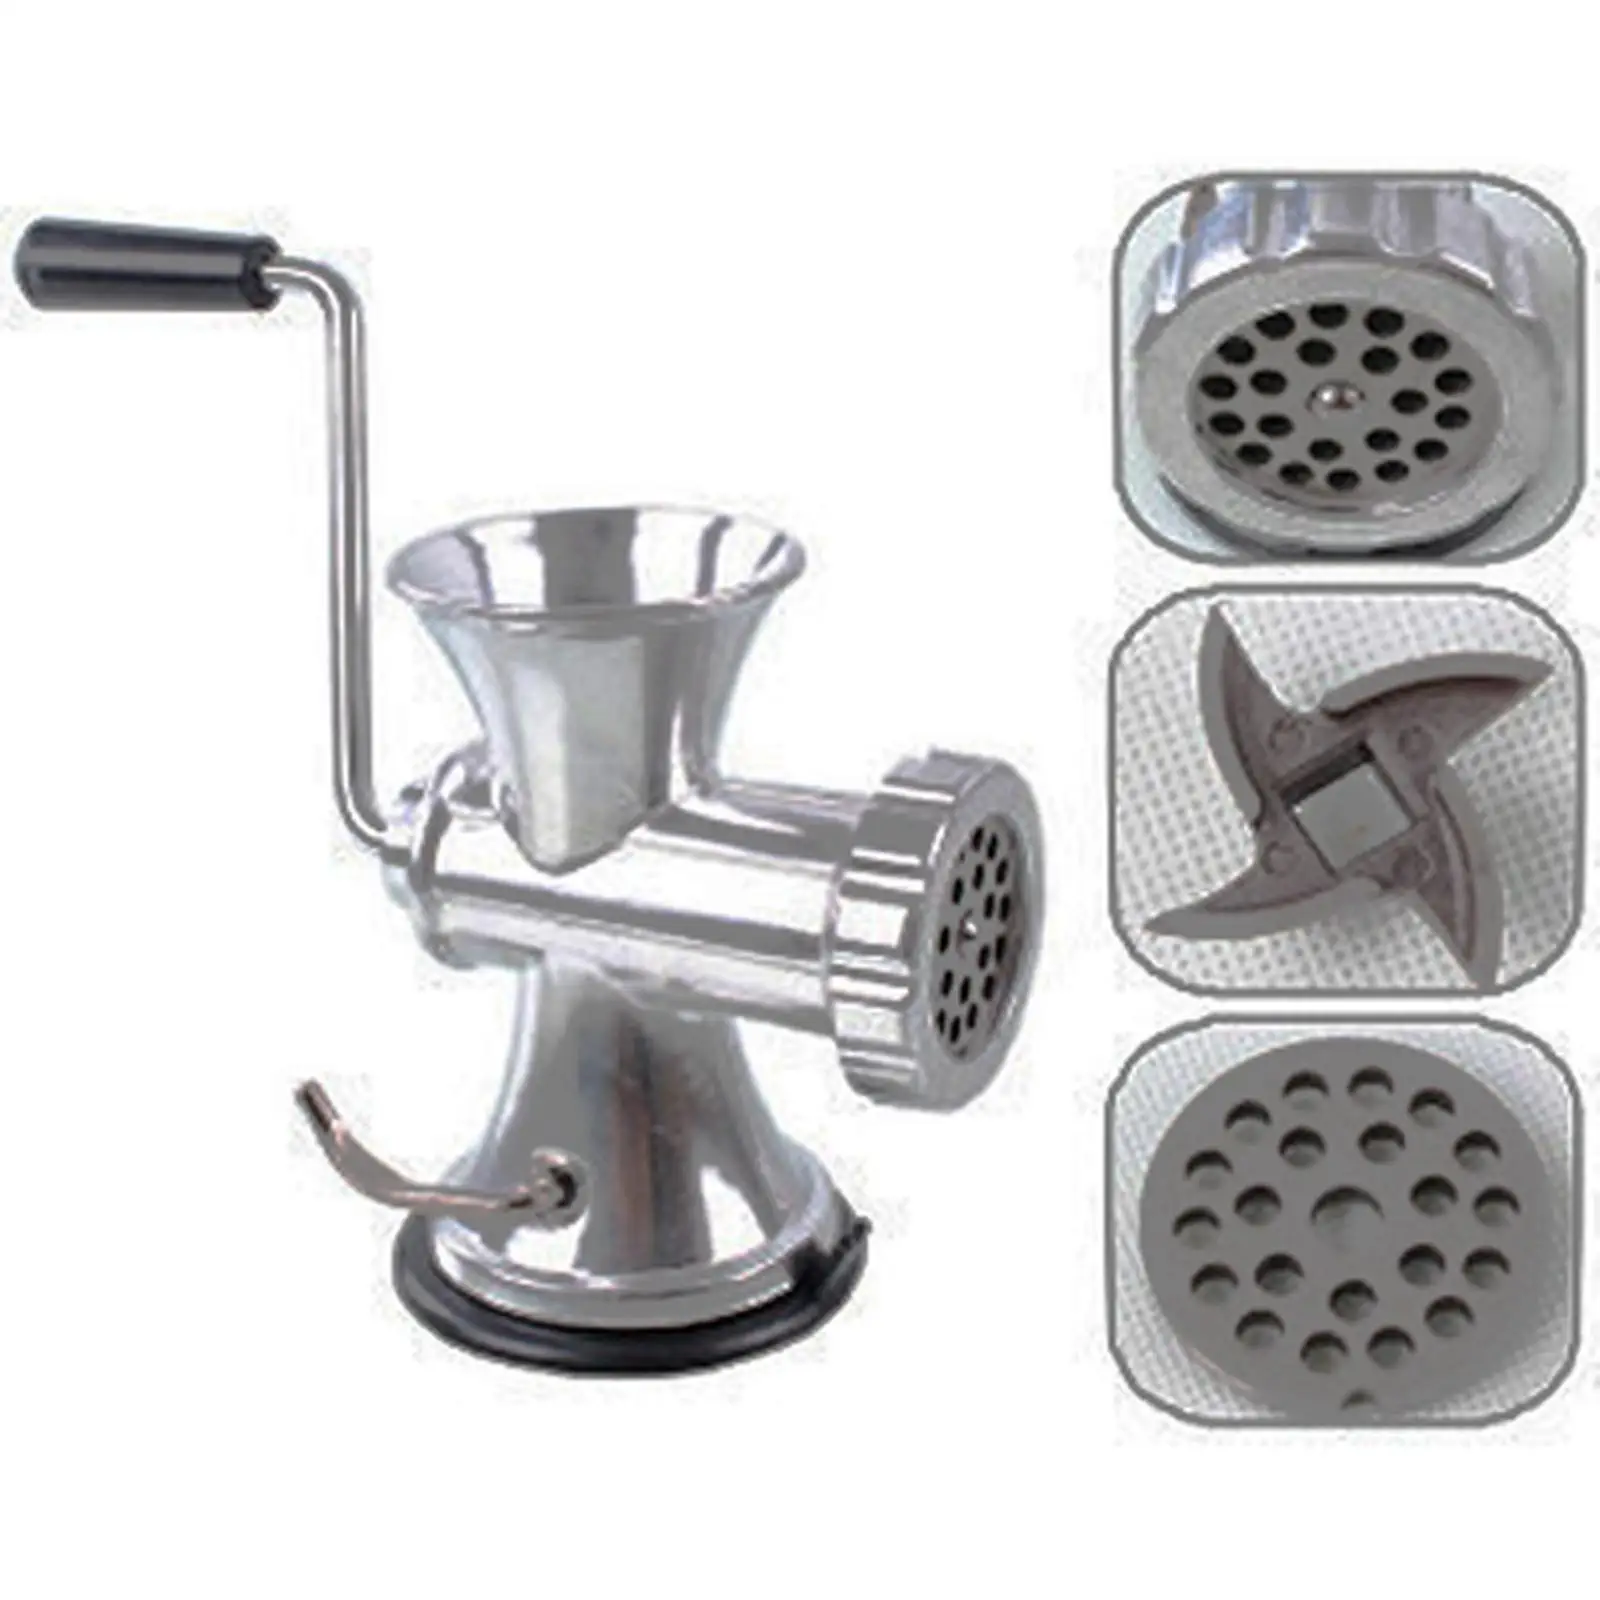 Handheld Manual Meat Grinder Household Kitchen Cooking Tool Sausage Filler Machine Meat Mincer for Beef Chicken Supplies